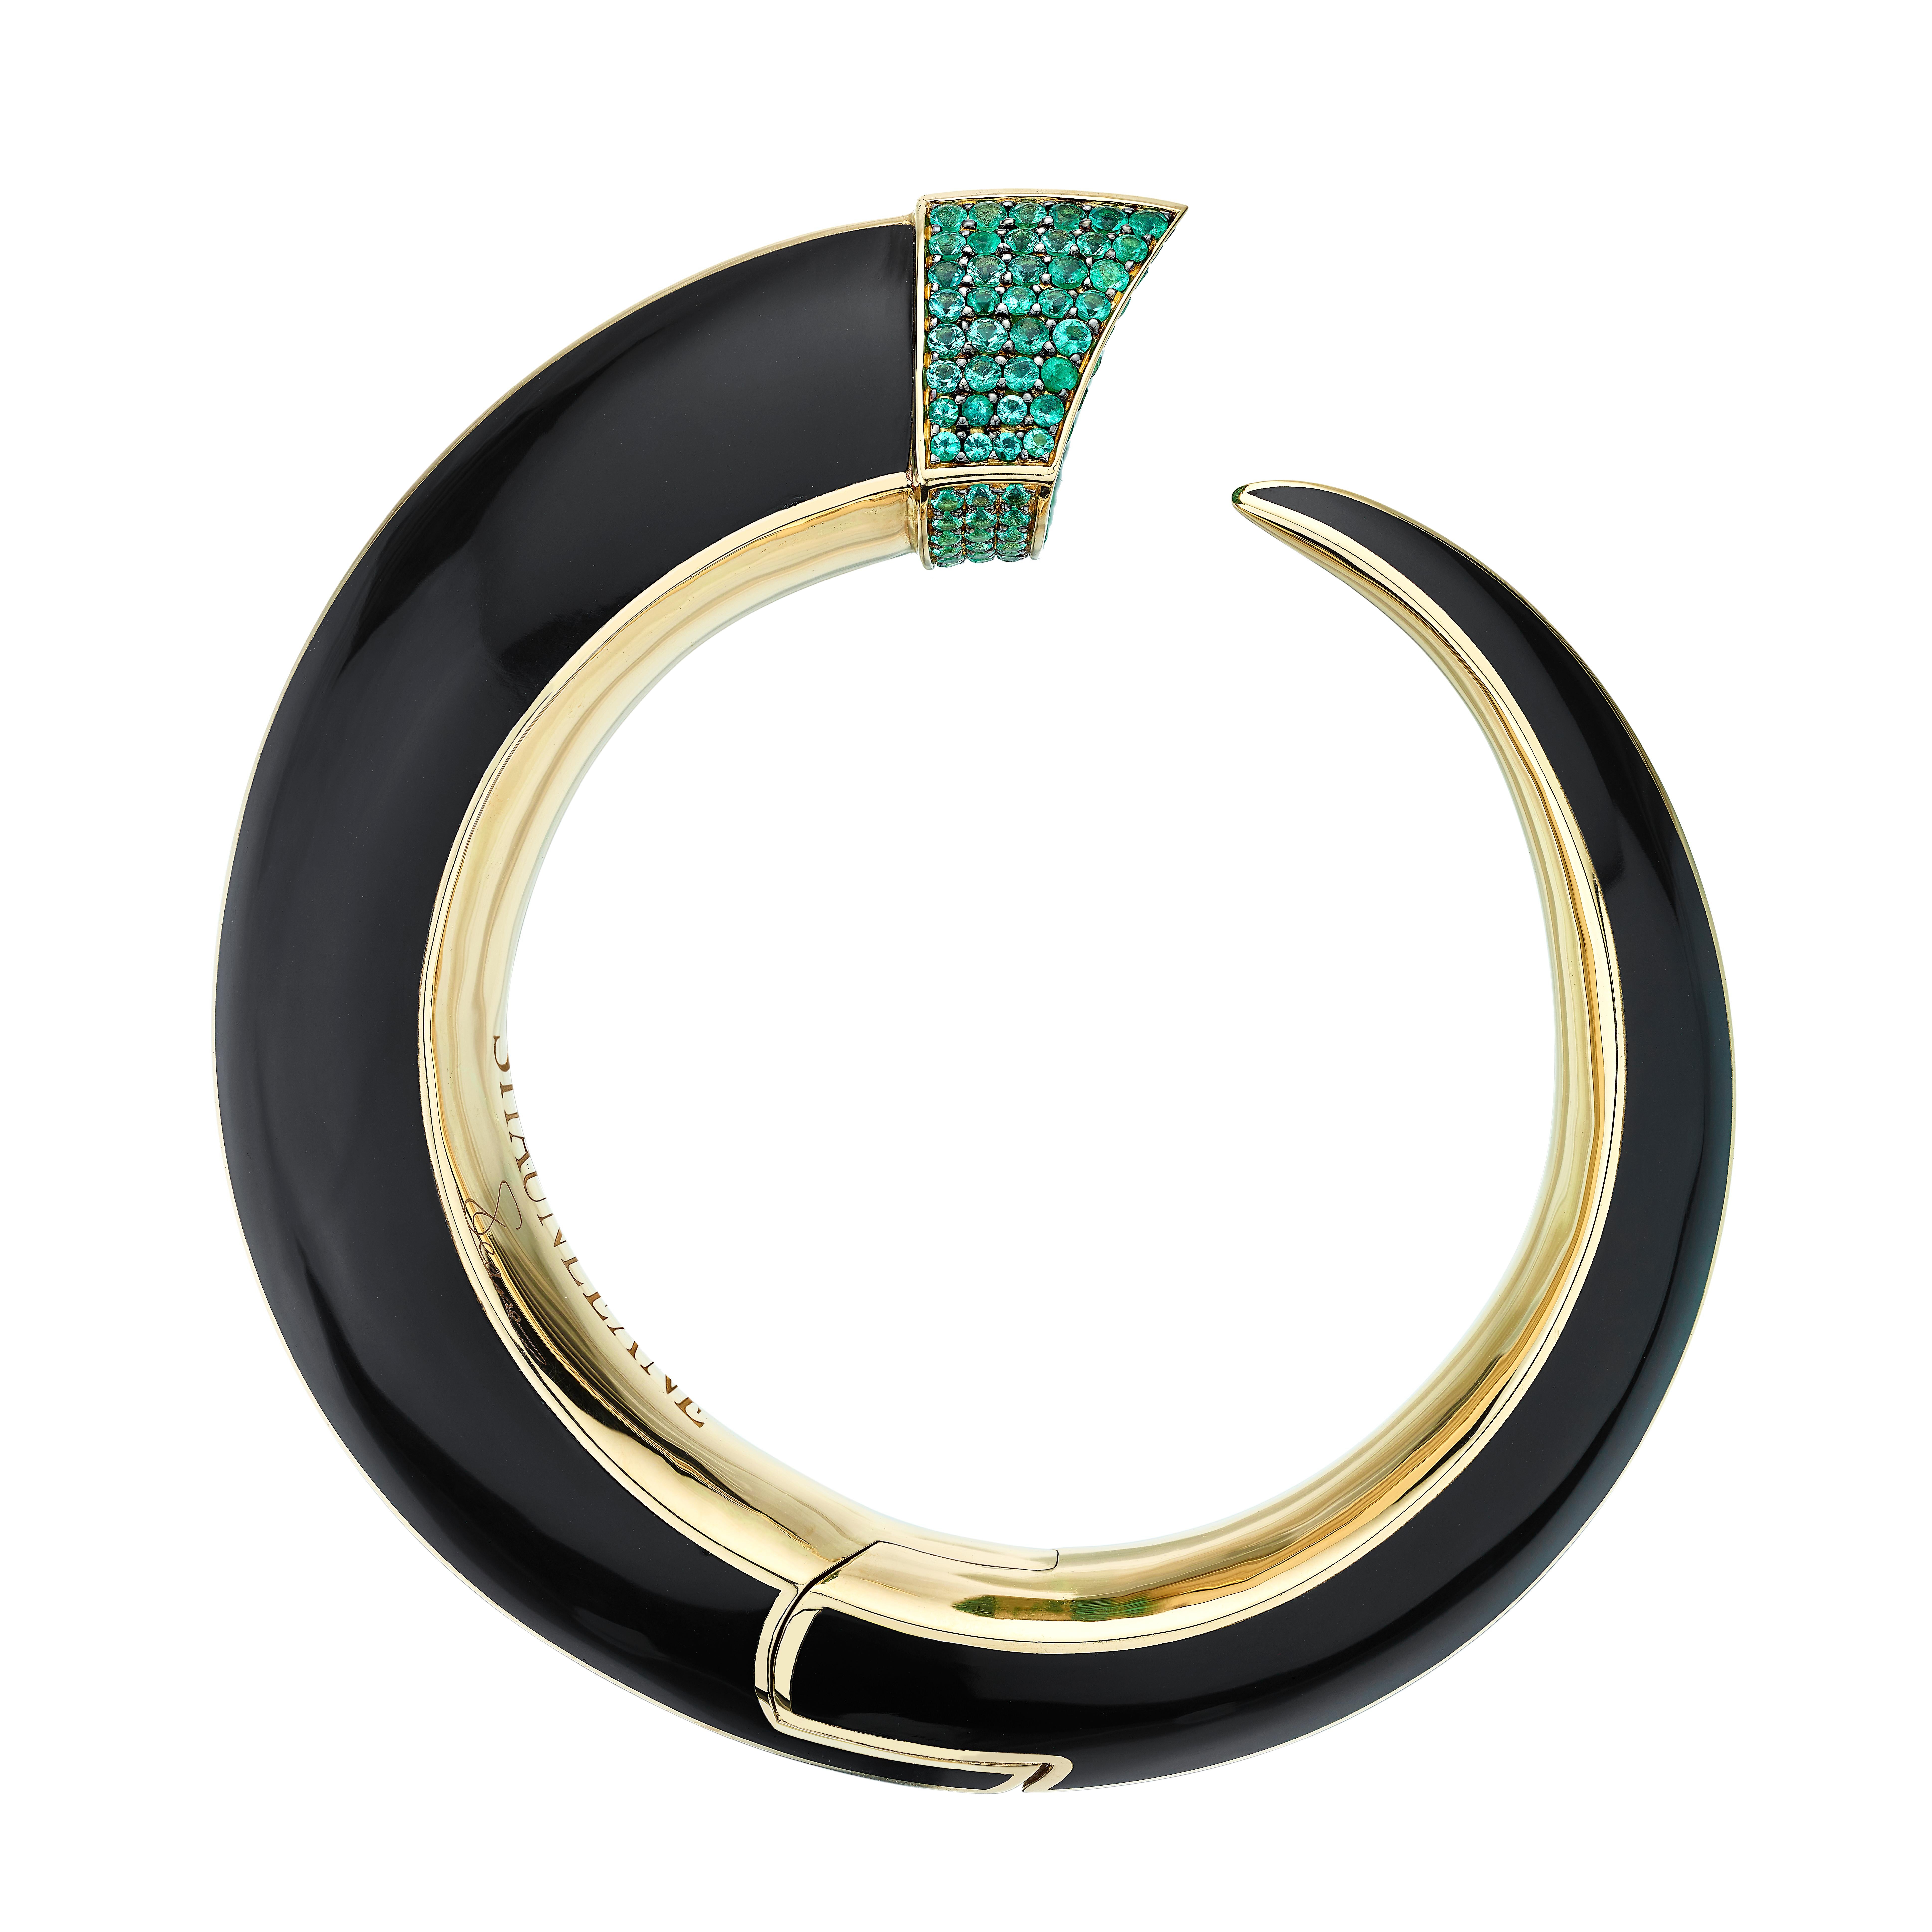 Leane's Sabre Couture Cuff is arguably his piéce de résistance; 18 carat gold inlaid with black ceramic, finished with 3.0 carats of precision-set emeralds. Here are two of Leane’s enduring influences: line, in the Sabre silhouette, and rigorous